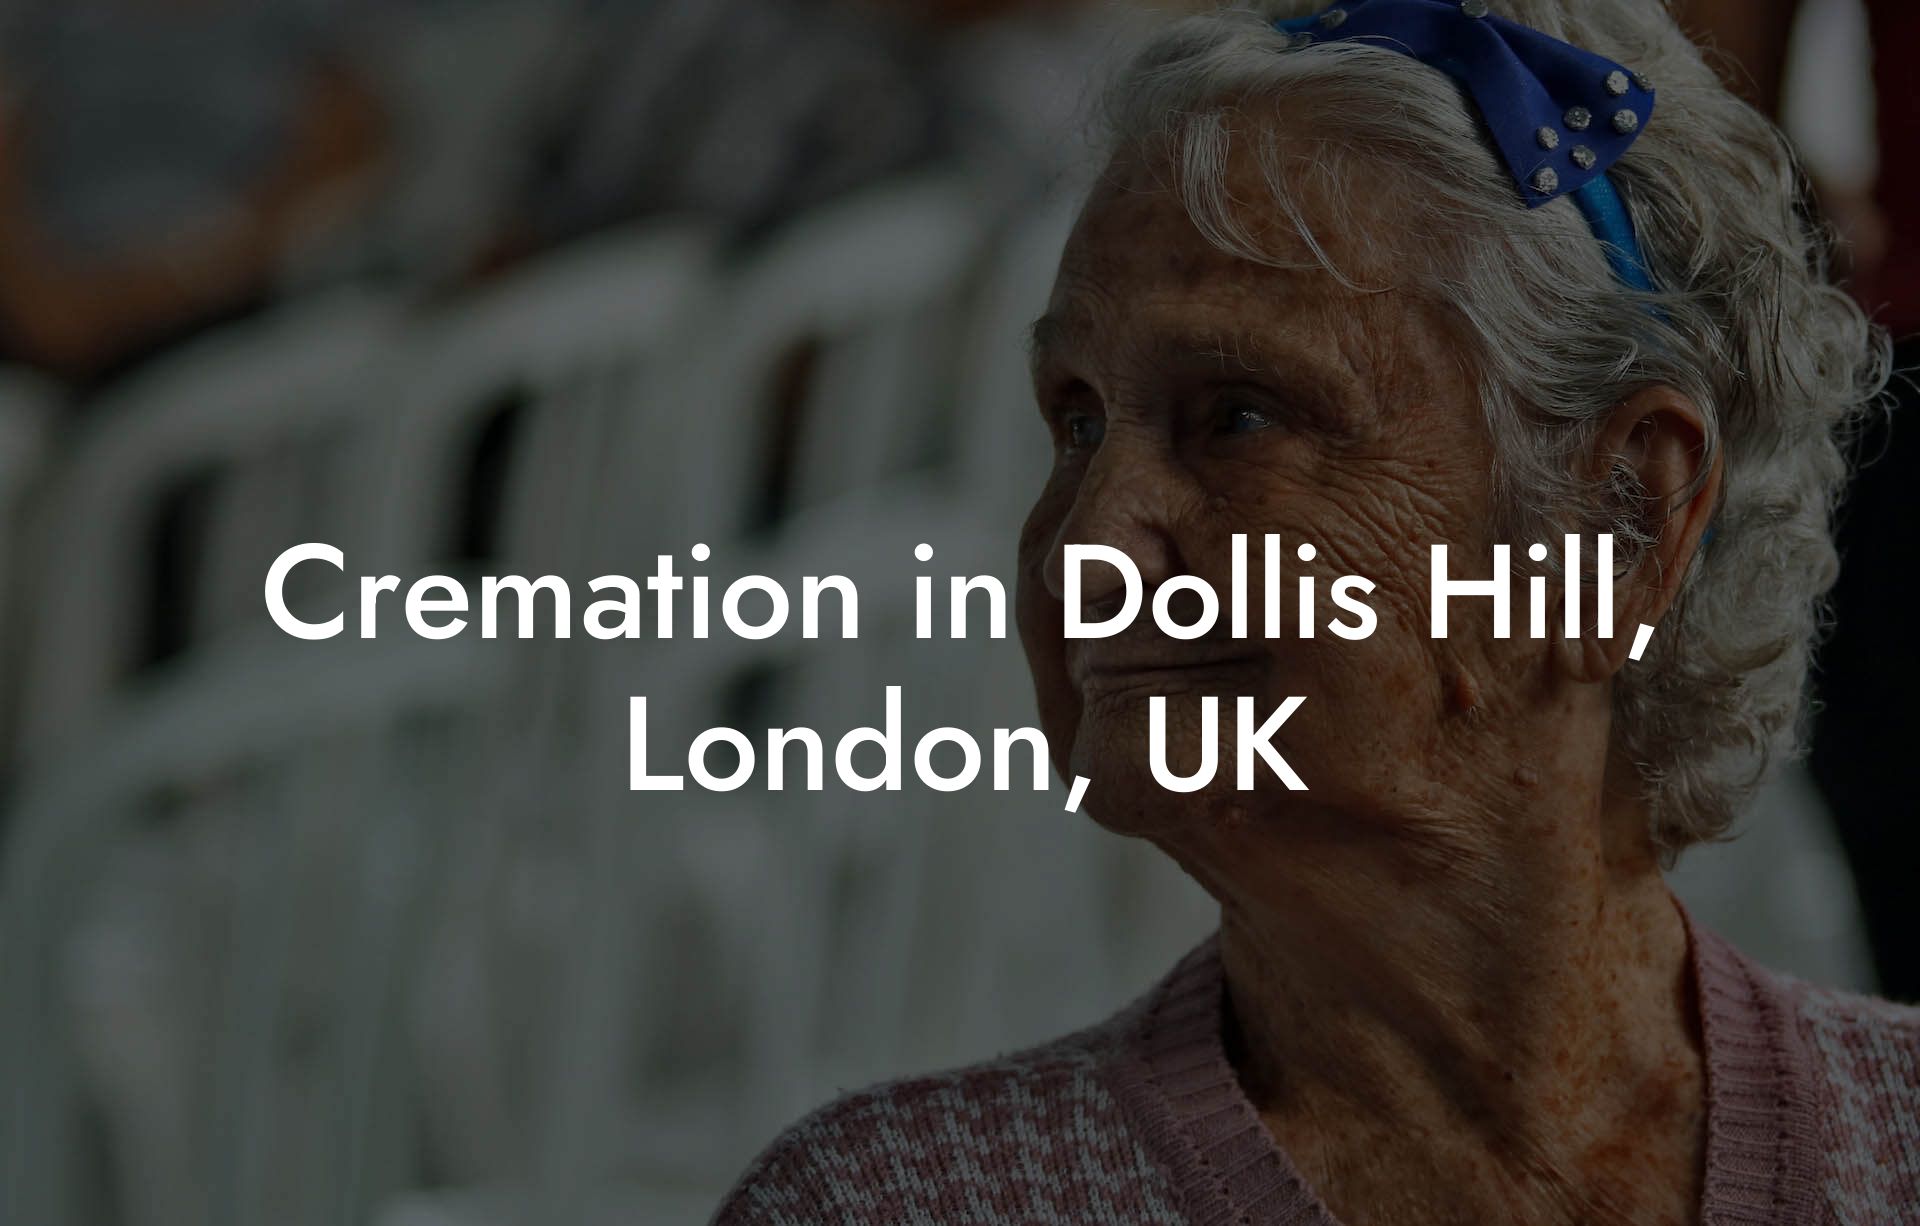 Cremation in Dollis Hill, London, UK